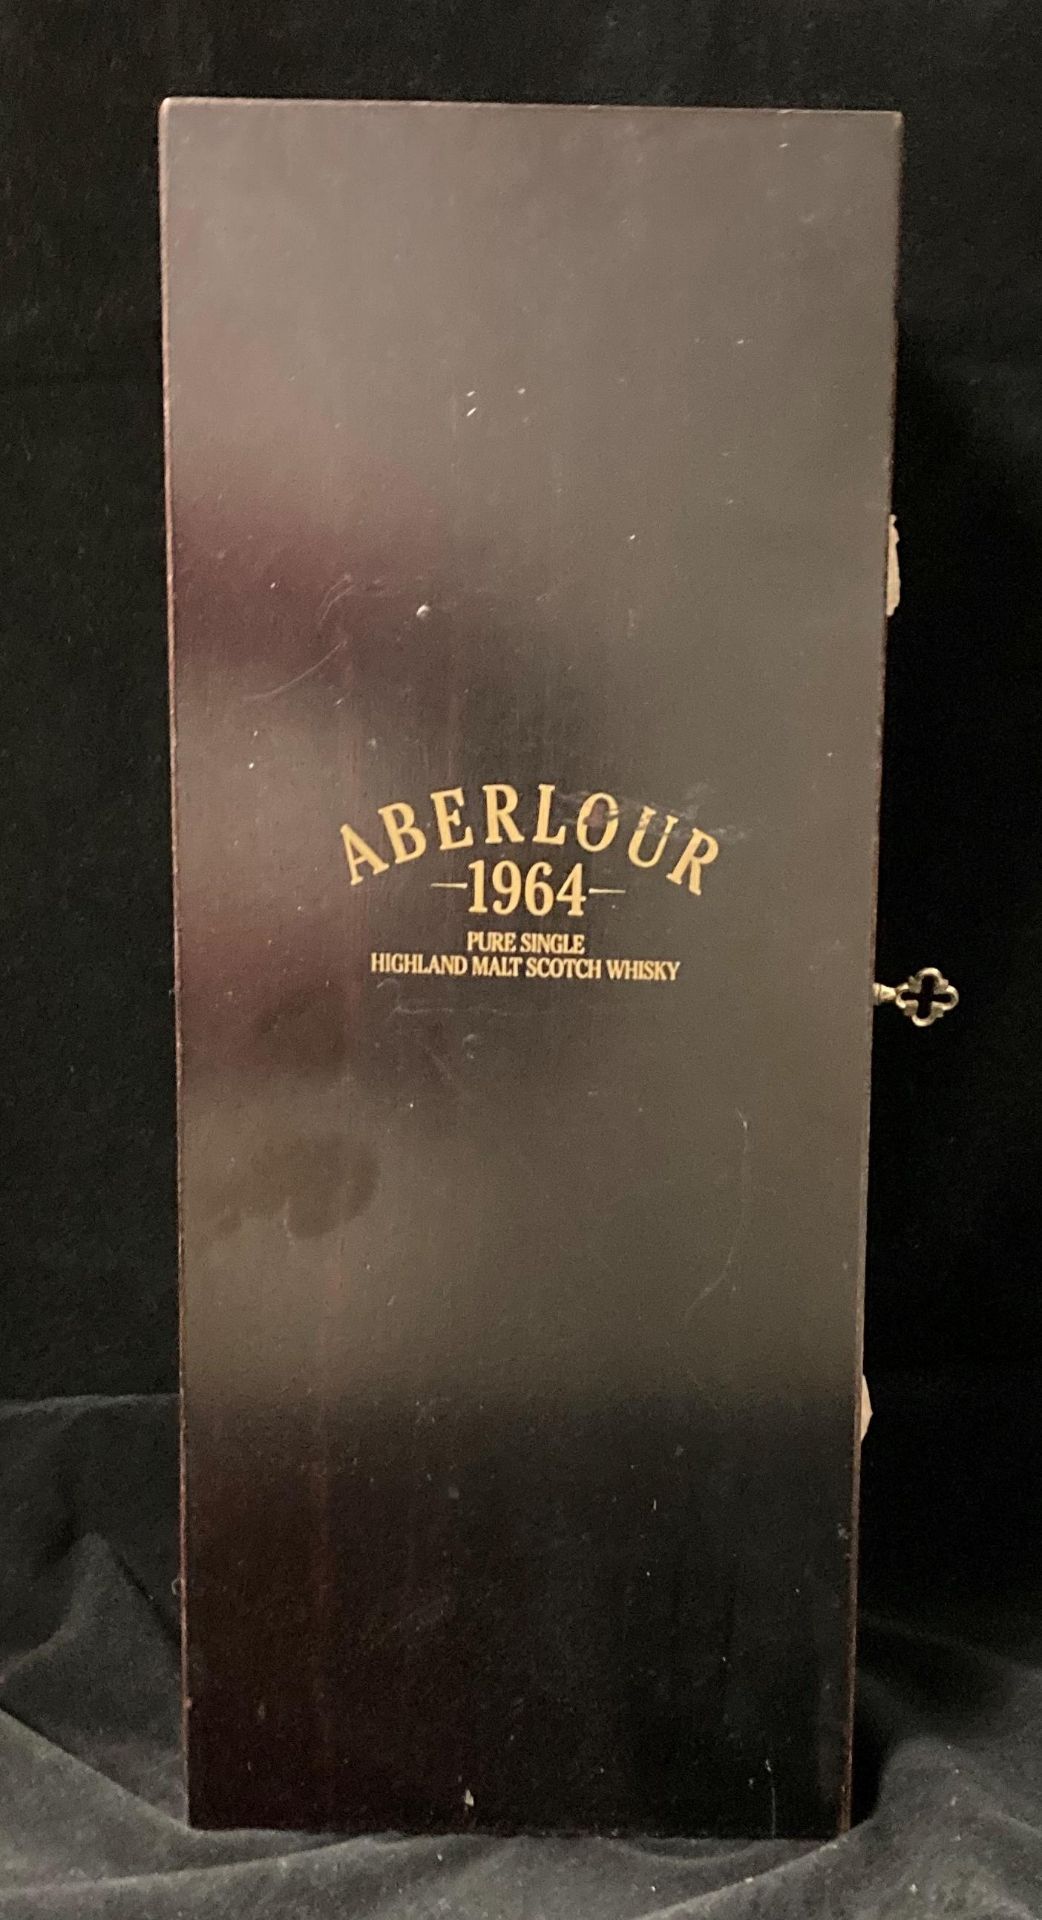 A 75cl bottle Aberlour twenty five years old Pure Single Highland Malt Scotch whisky distilled in - Image 3 of 3